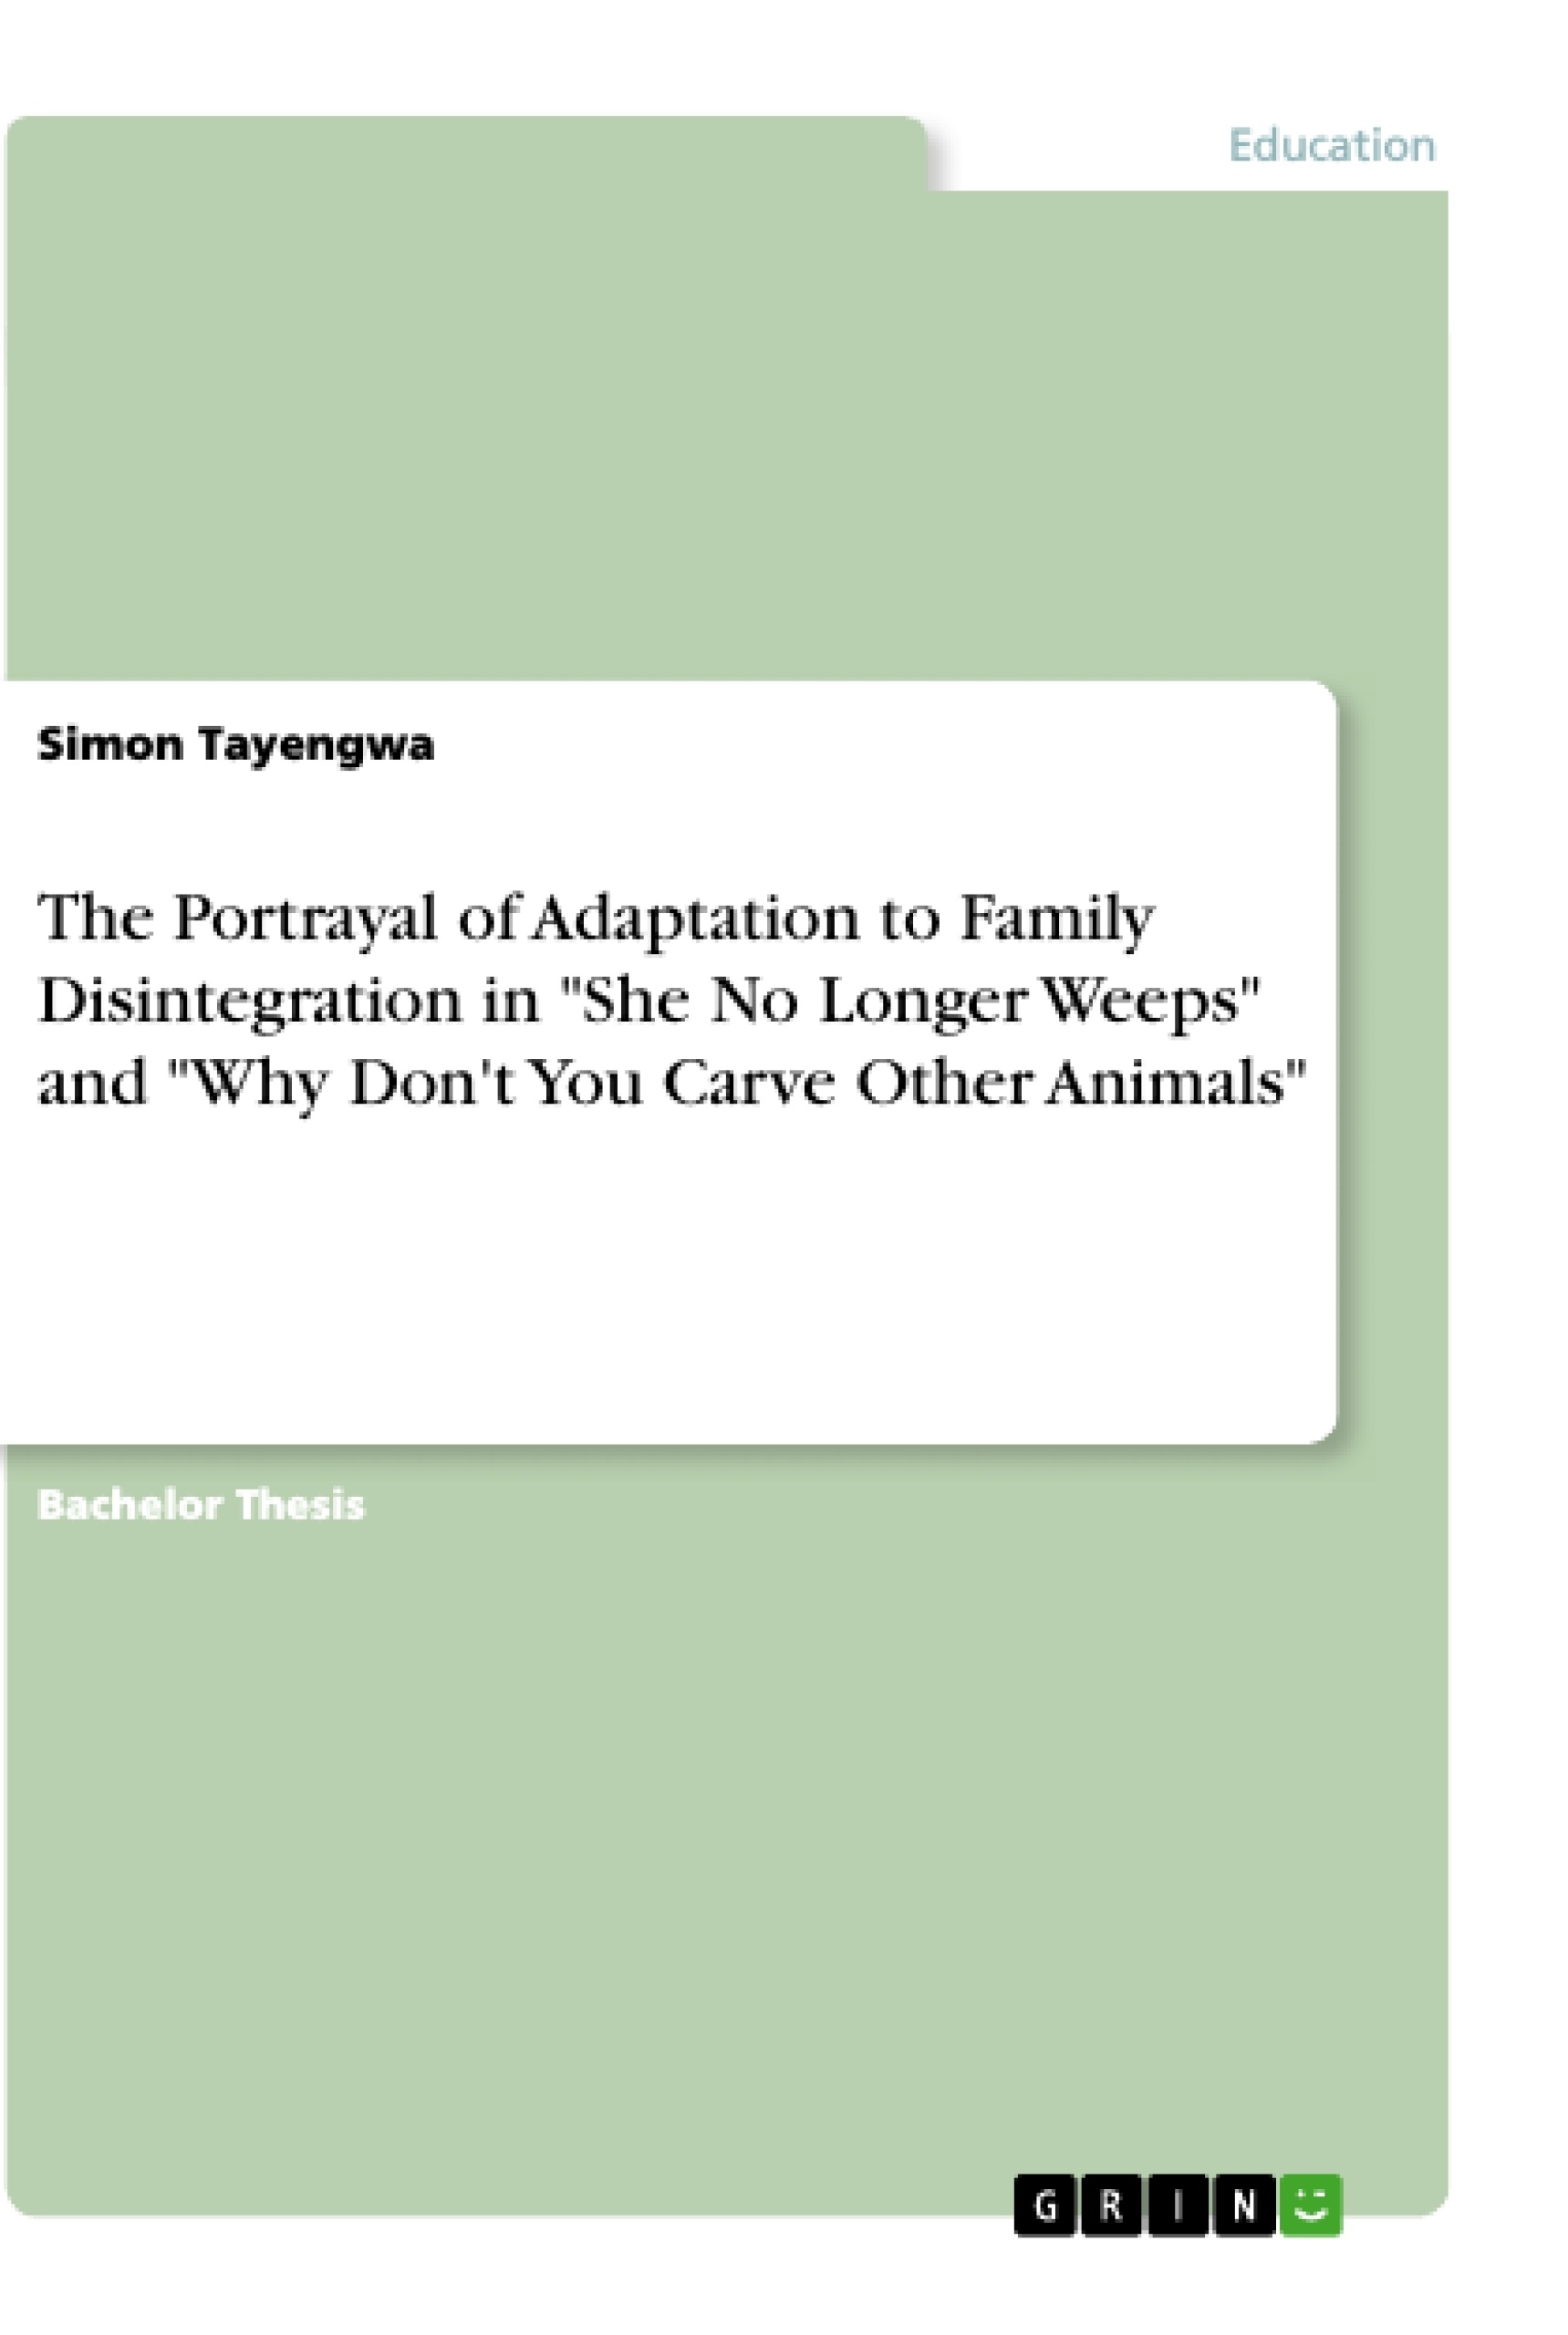 Title: The Portrayal of Adaptation to Family Disintegration in "She No Longer Weeps" and "Why Don't You Carve Other Animals"